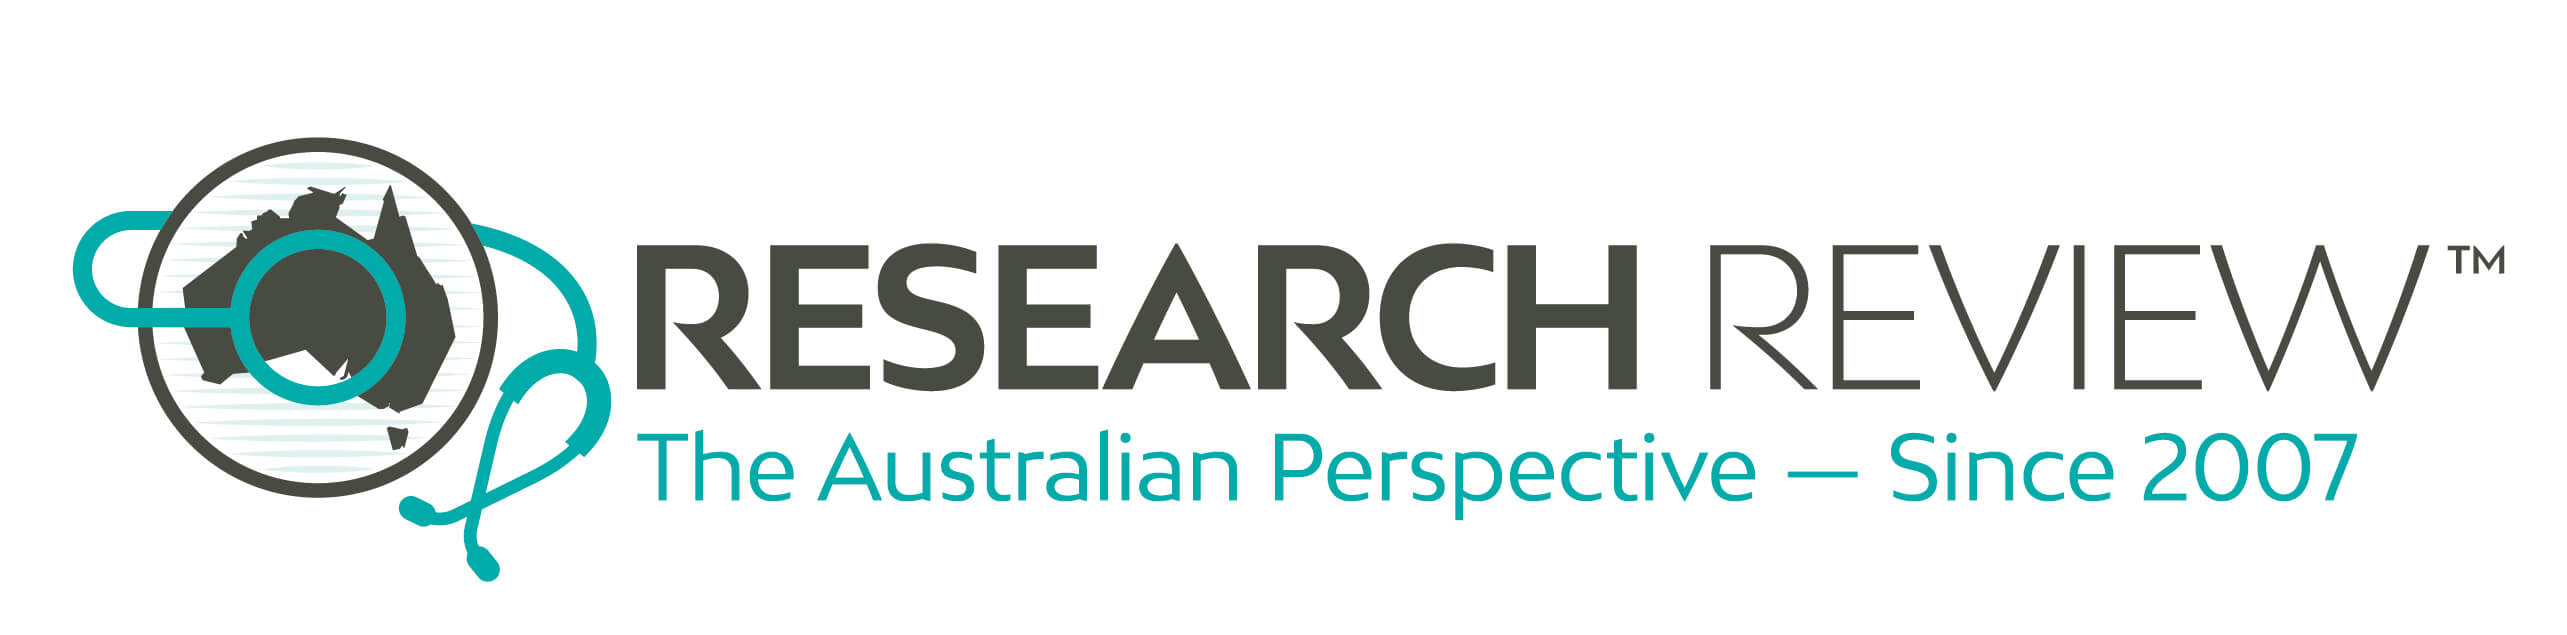 Research review logo (1)